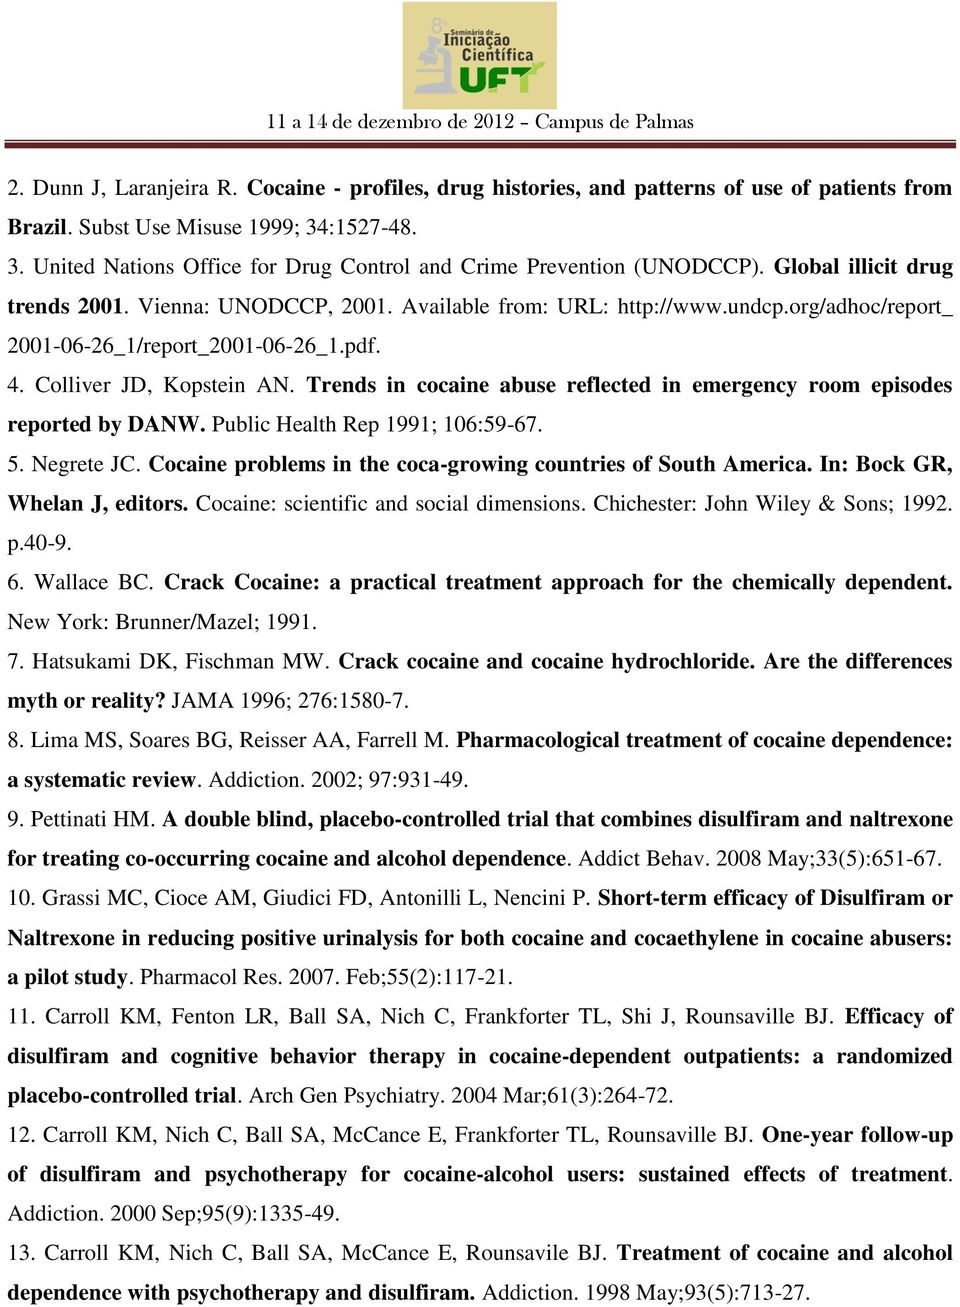 org/adhoc/report_ 2001-06-26_1/report_2001-06-26_1.pdf. 4. Colliver JD, Kopstein AN. Trends in cocaine abuse reflected in emergency room episodes reported by DANW. Public Health Rep 1991; 106:59-67.